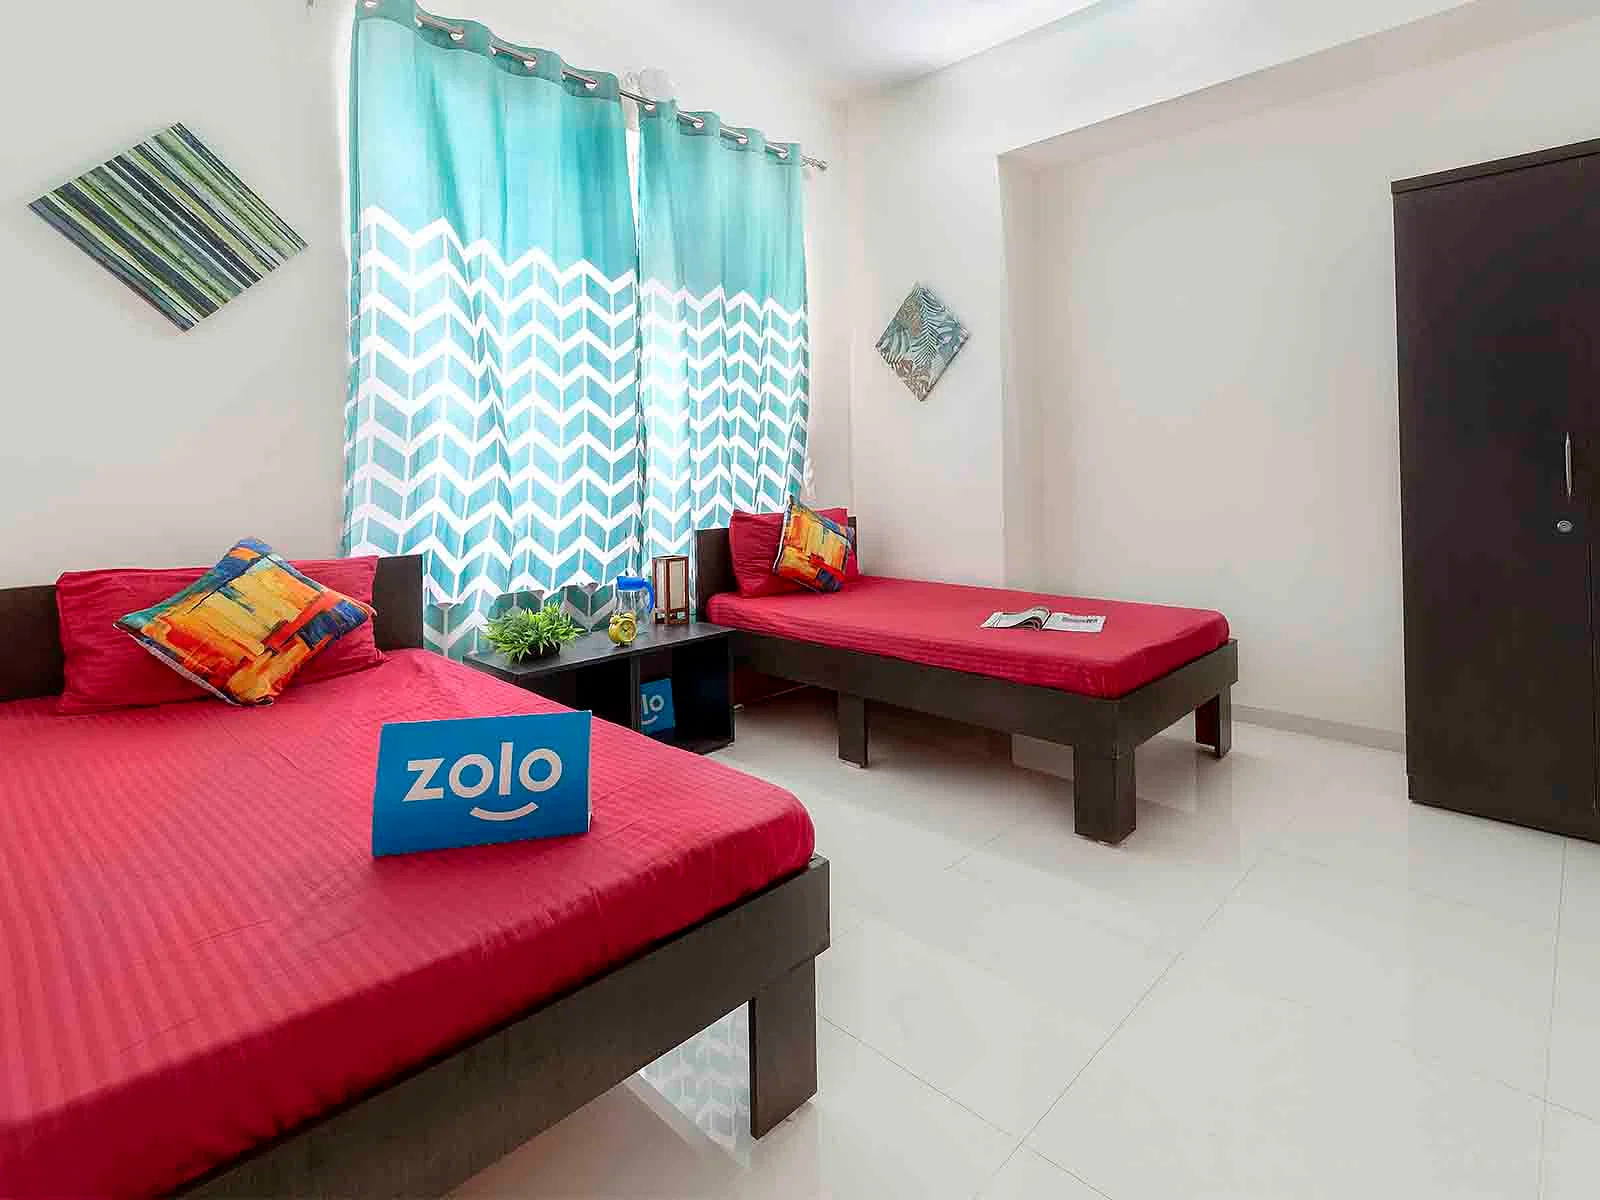 safe and affordable hostels for unisex students with 24/7 security and CCTV surveillance-Zolo Altius